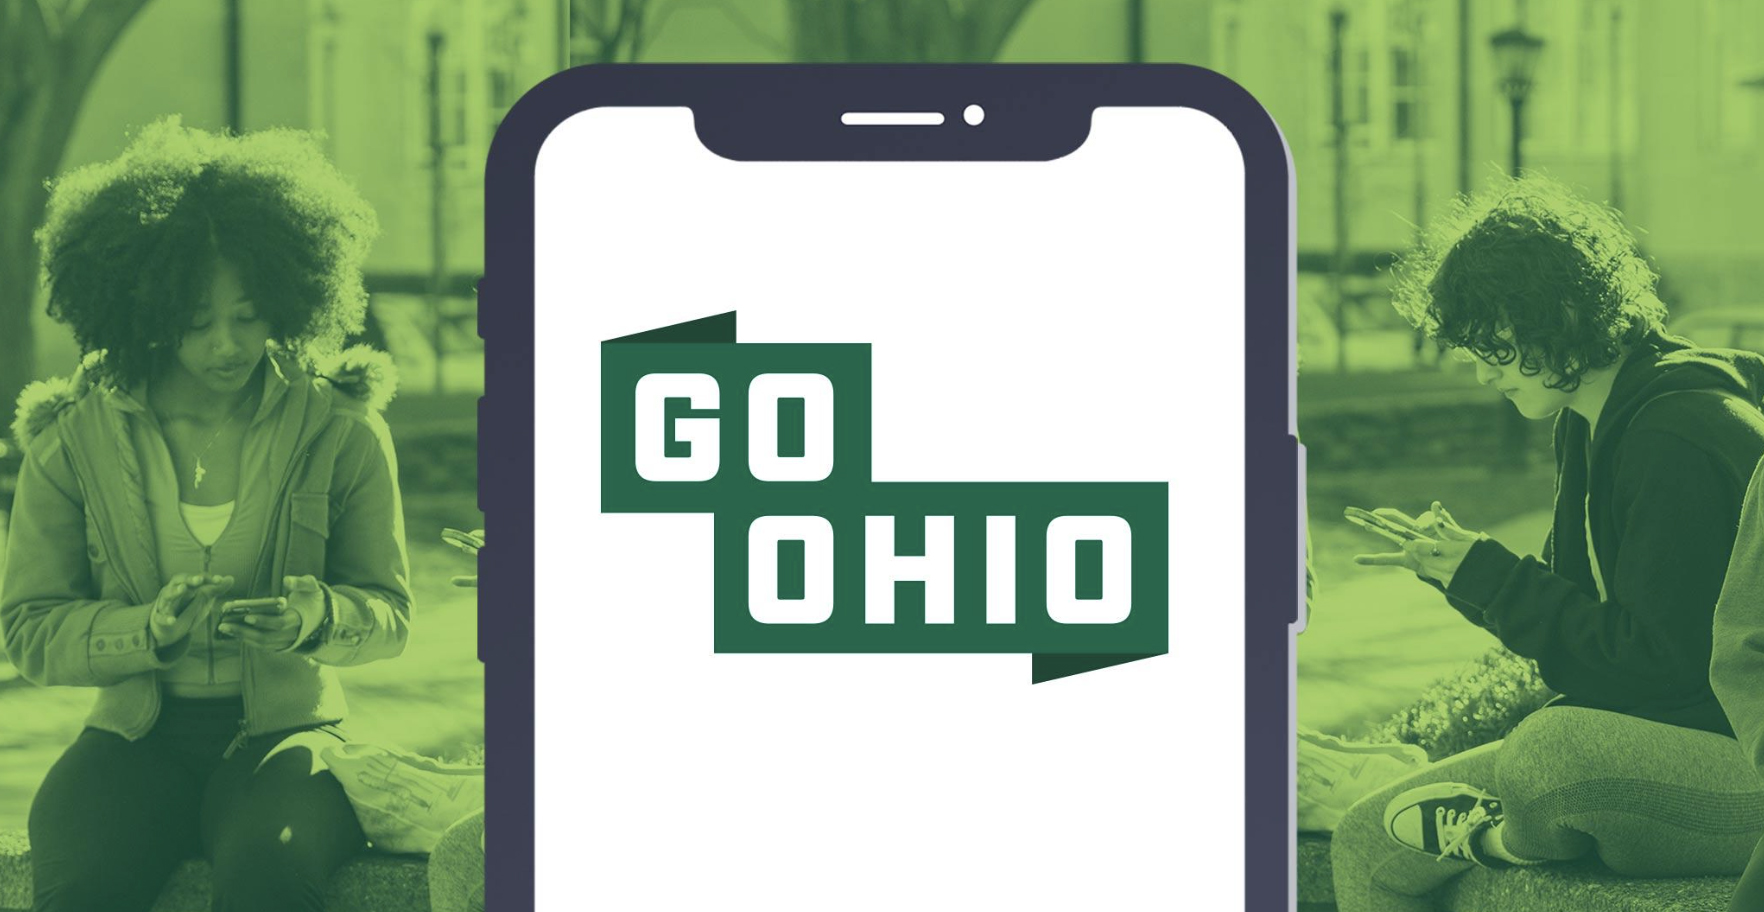 Image of phone with words "Go OHIO" atop a background photo of students